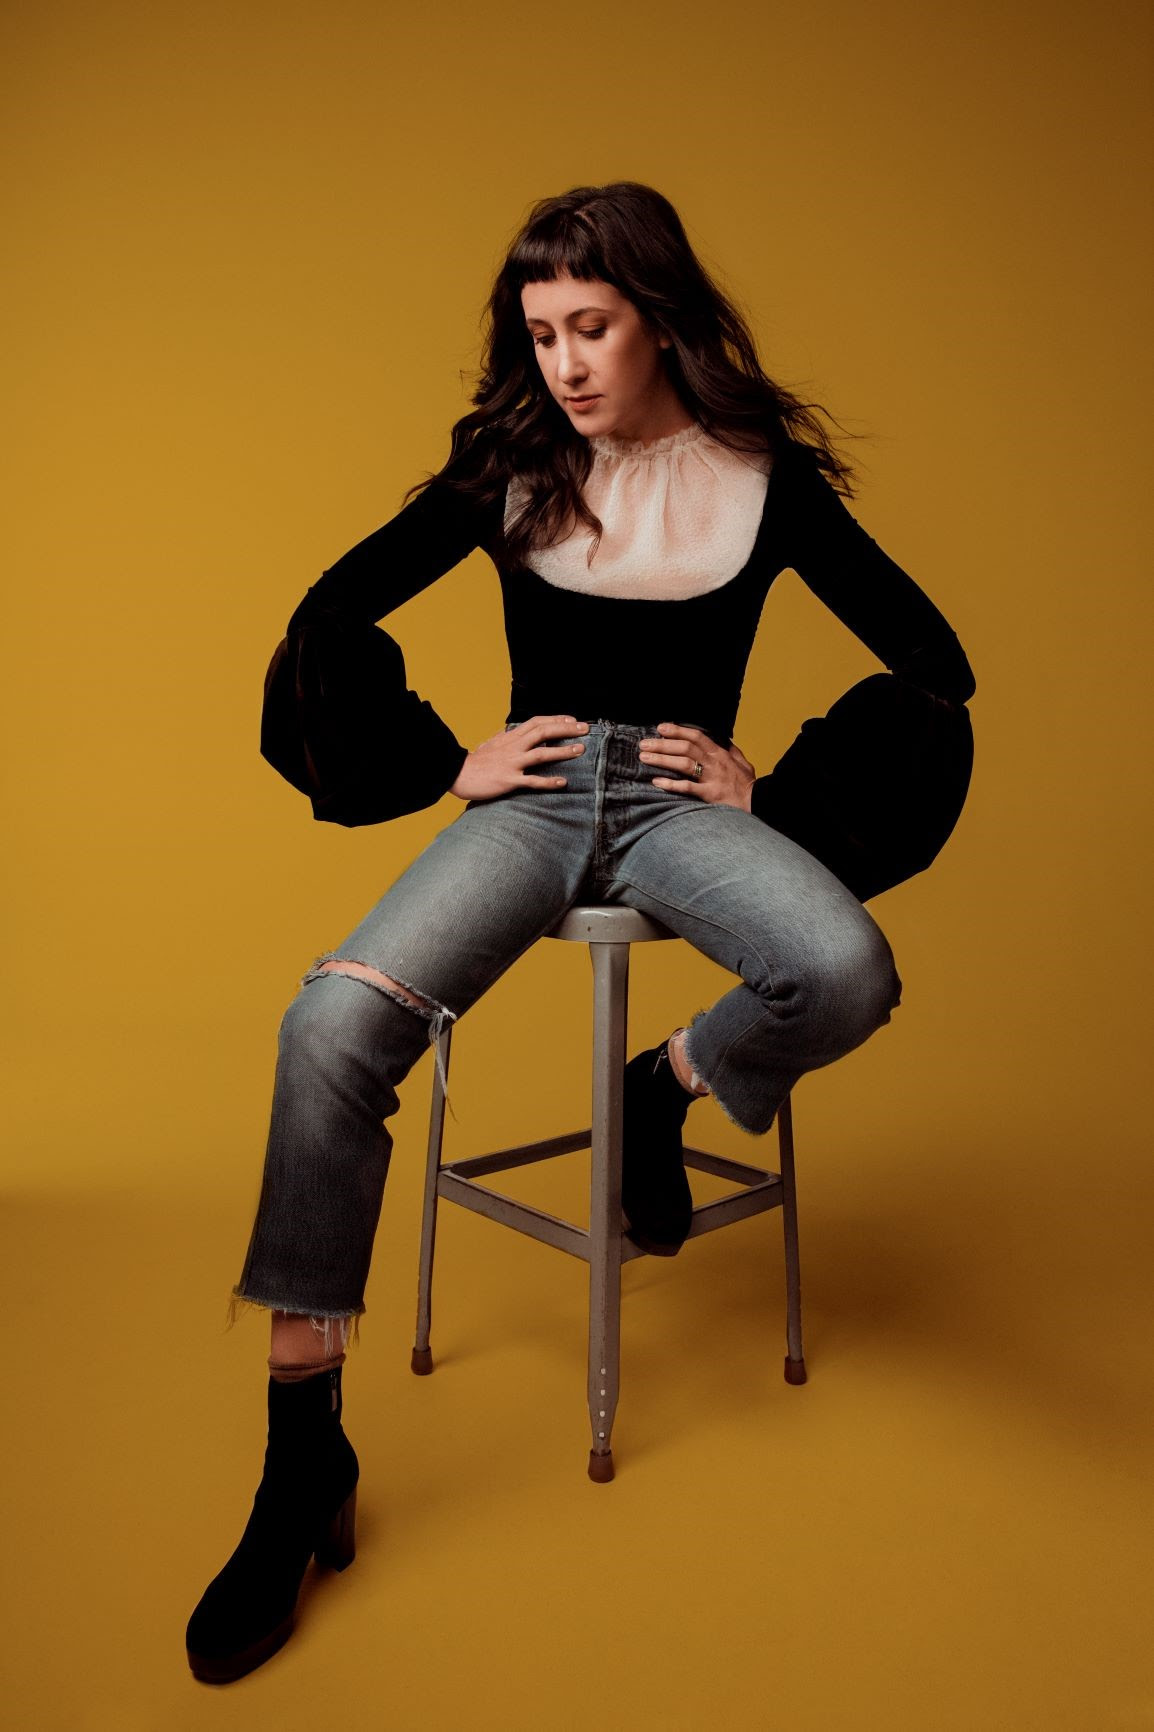 Vanessa Carlton releases video for “The Only Way to Love”